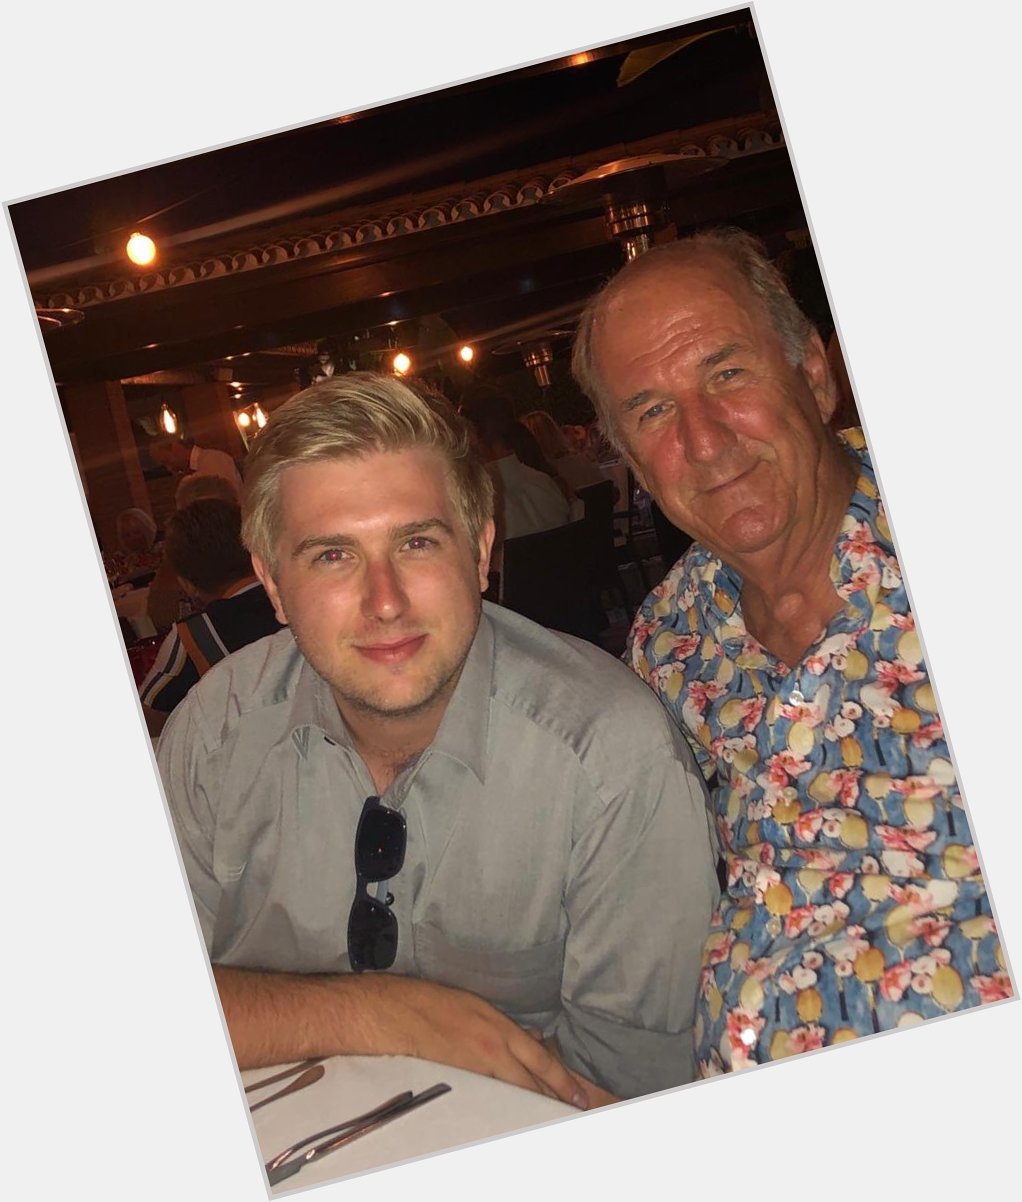 Just want to say a MASSIVE HAPPY BIRTHDAY to my Poppa Russ Abbot!!    